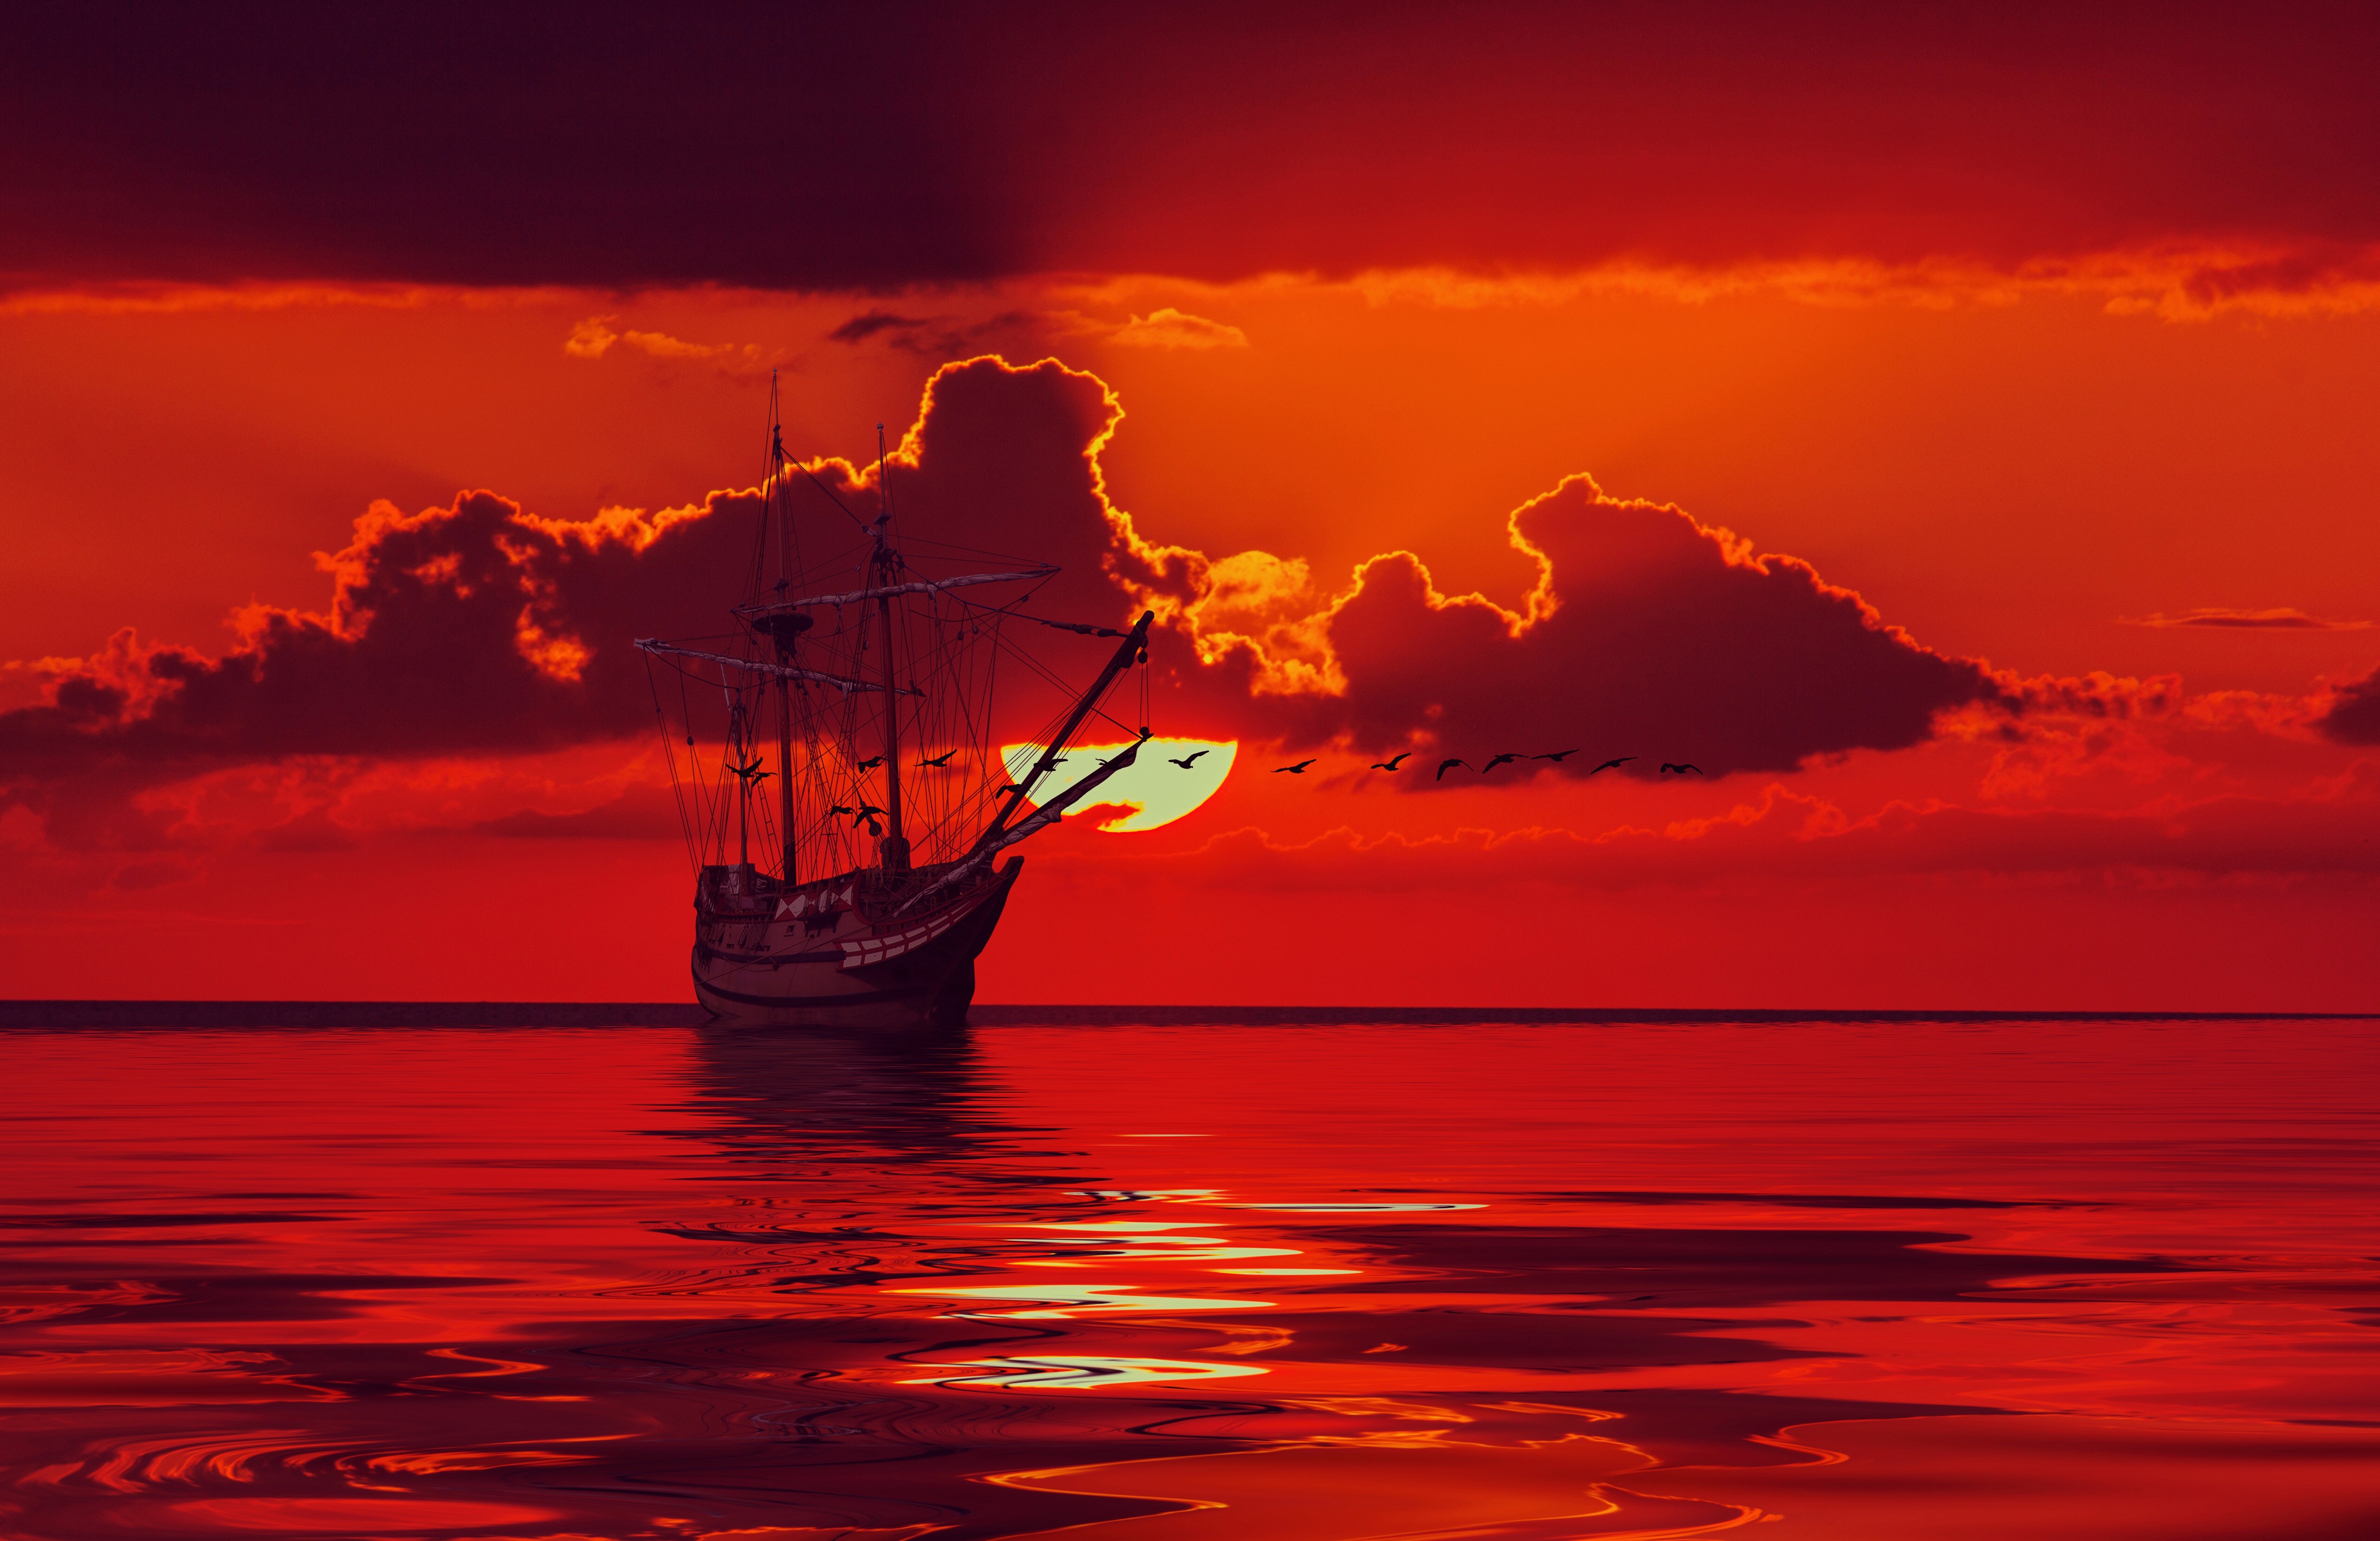 Sea Colorful Boat And Sunlight Wallpapers